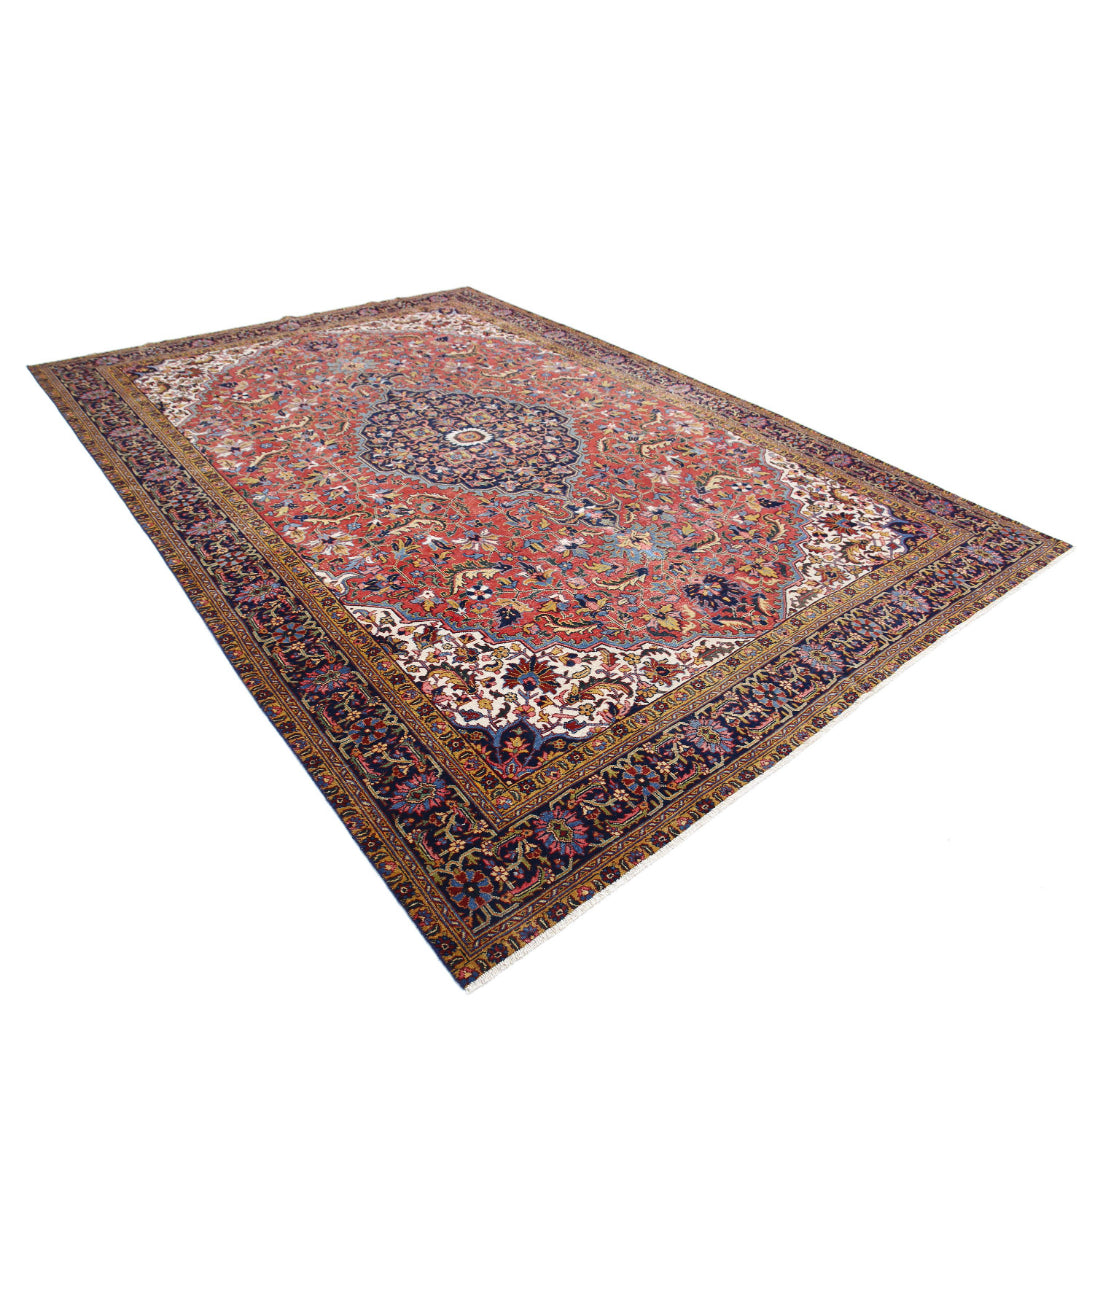 Hand Knotted Vintage Persian Heriz Wool Rug - 8'2'' x 11'8'' 8'2'' x 11'8'' (245 X 350) / Rust / Blue